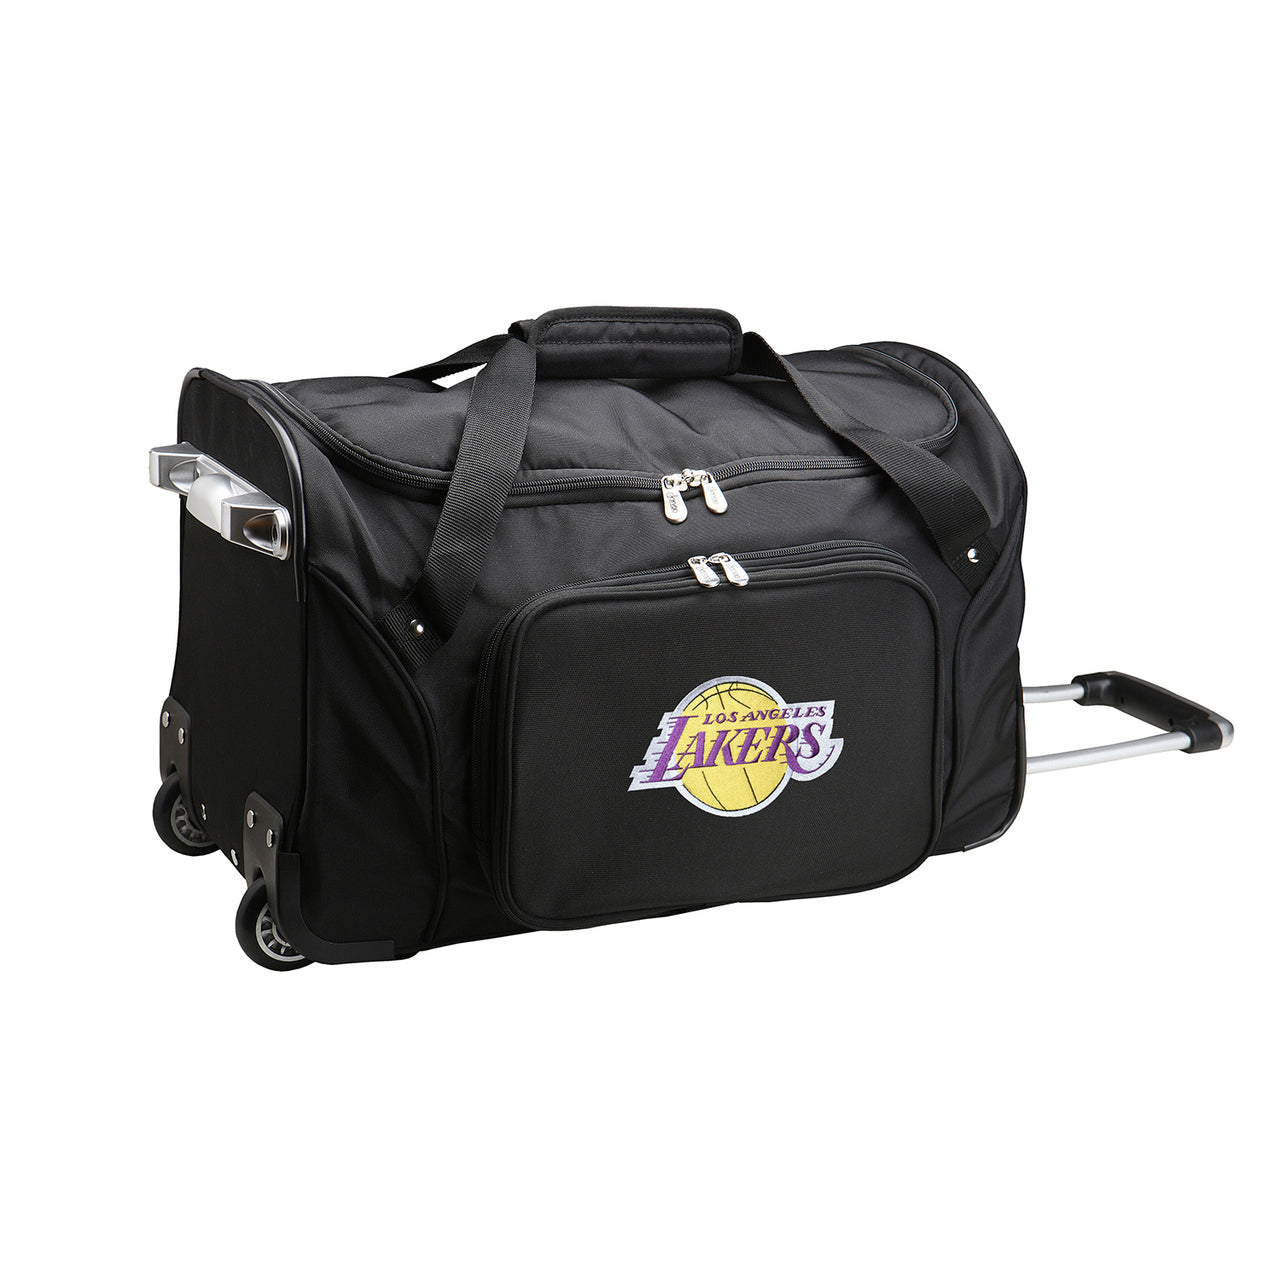 Buy Lakers Bag Online In India - Etsy India